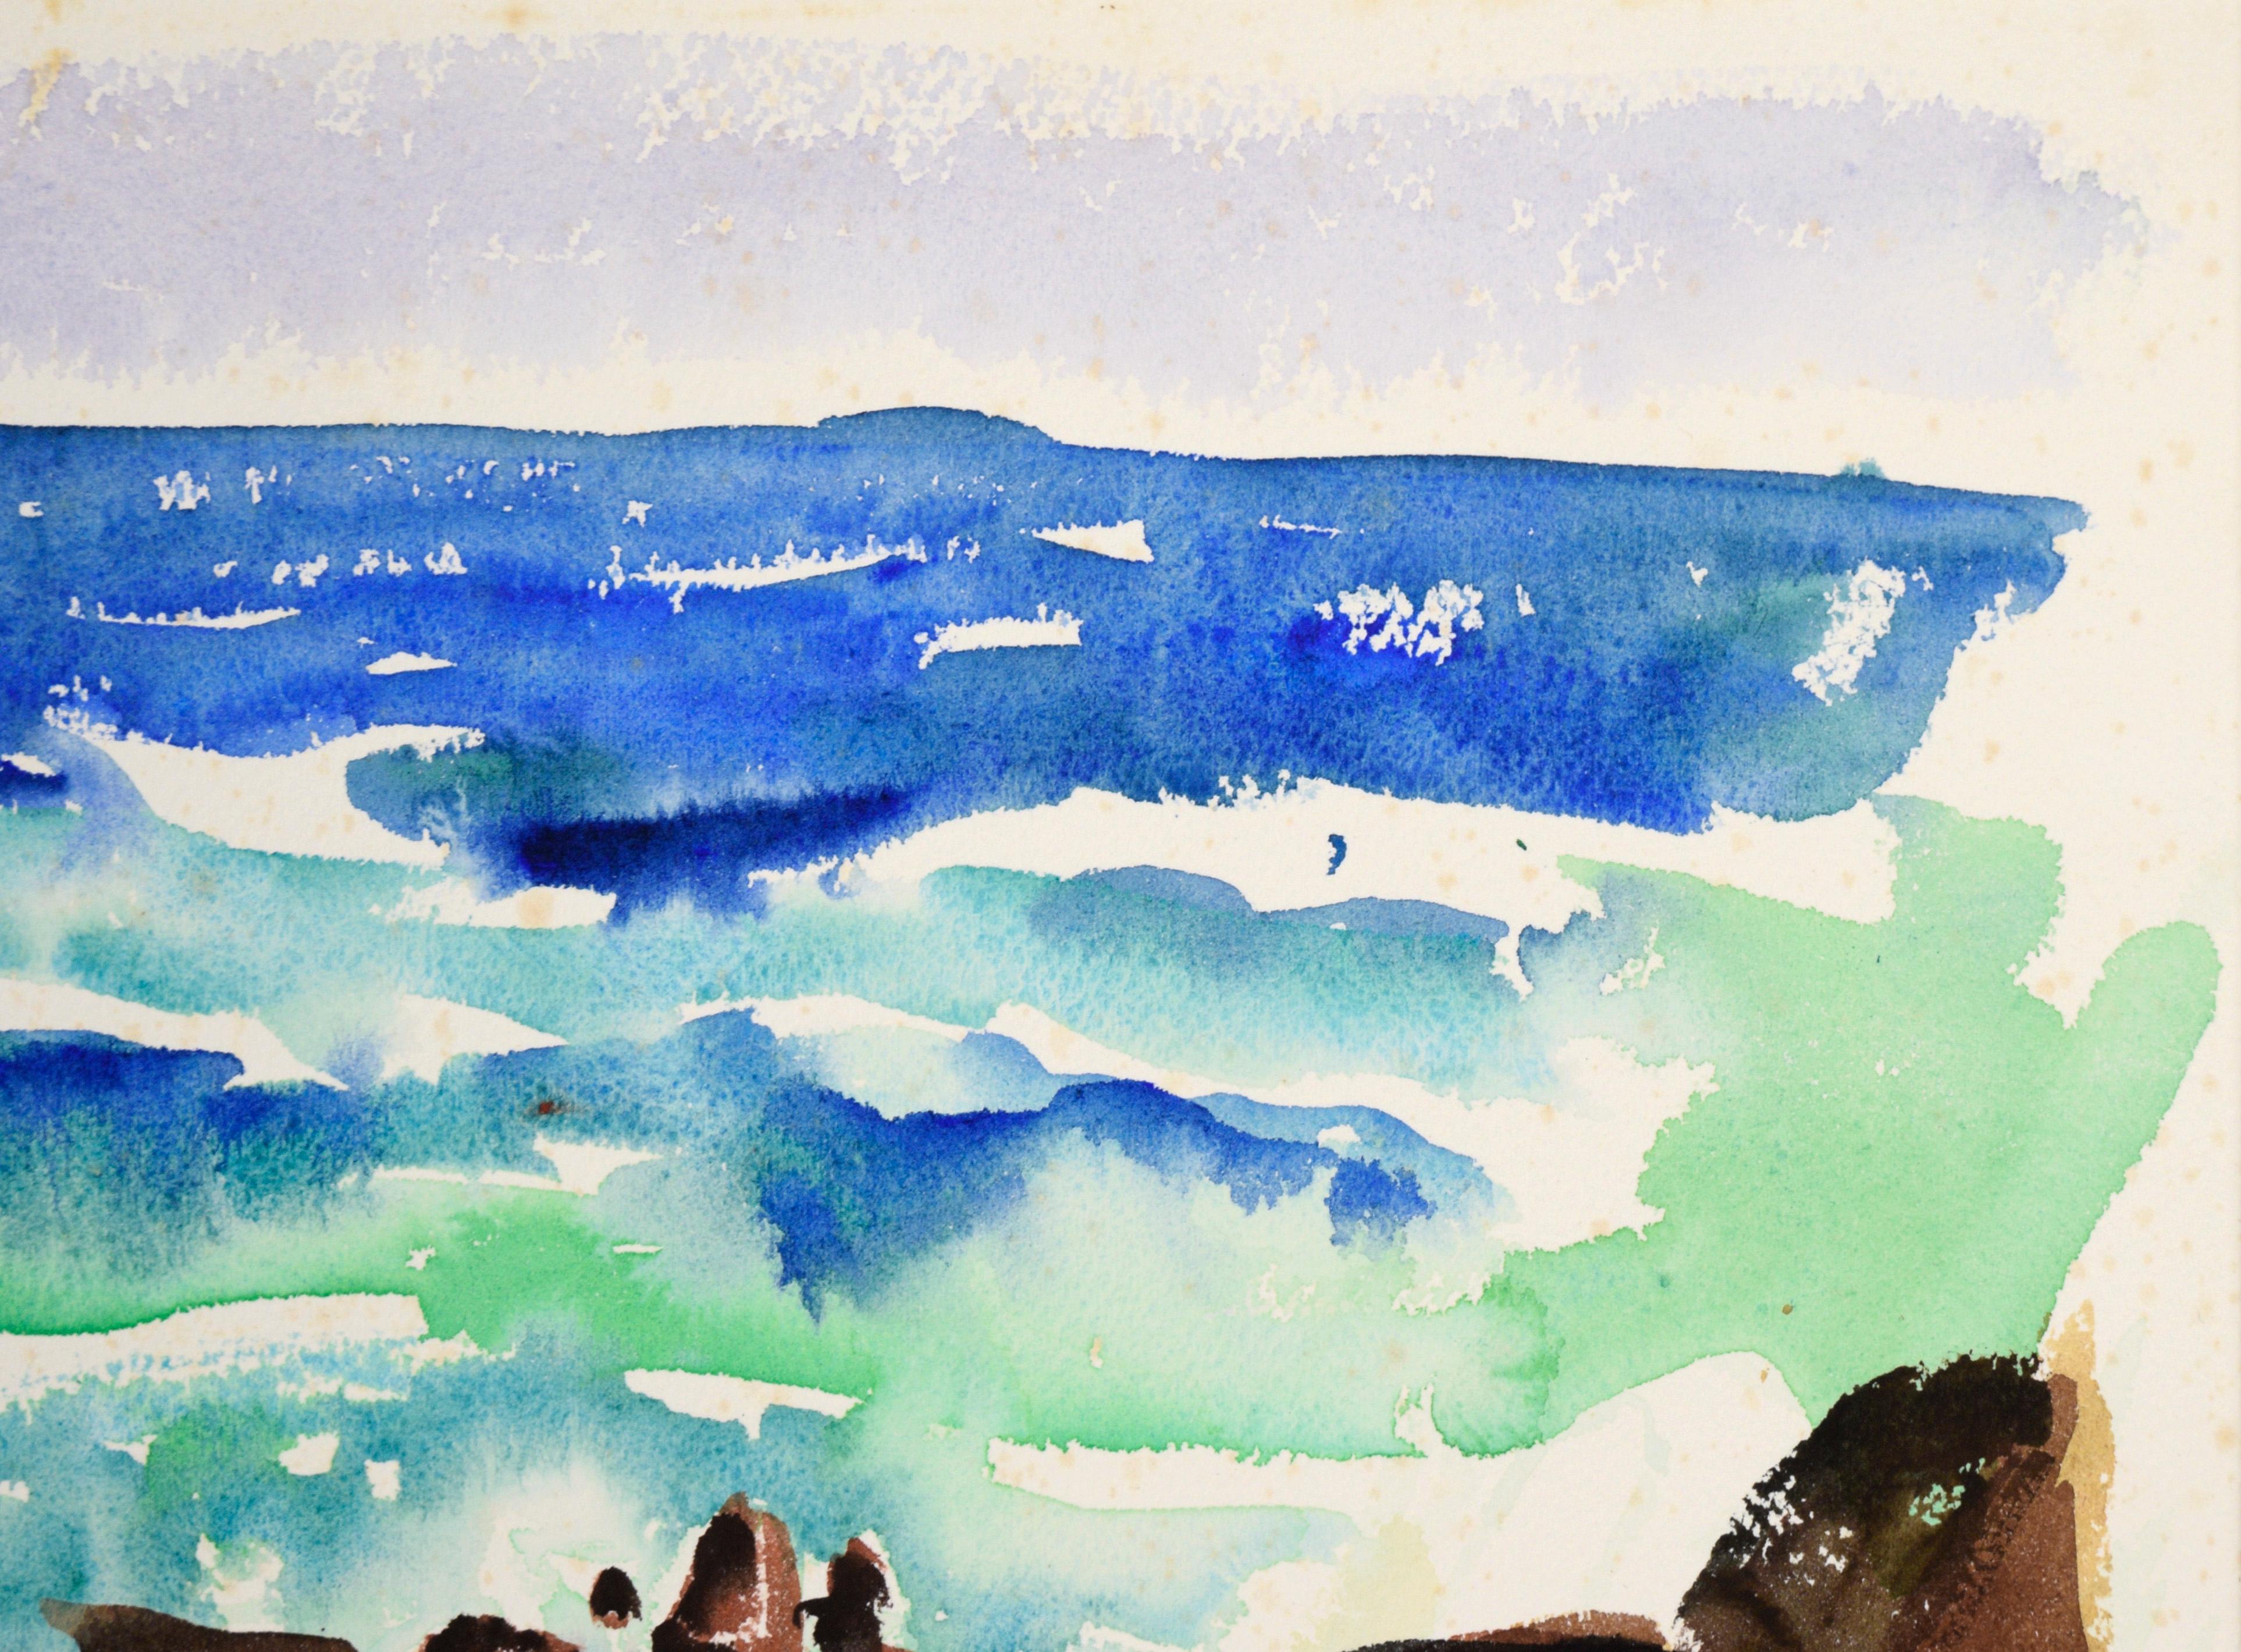 Modernist Rocky Seascape in Watercolor on Paper

A vibrant watercolor seascape by California artist Lucile Marie Johnston (1907-1994, American). Waves crash in among a group of brown rocks. The artist has brilliantly used negative space of the paper